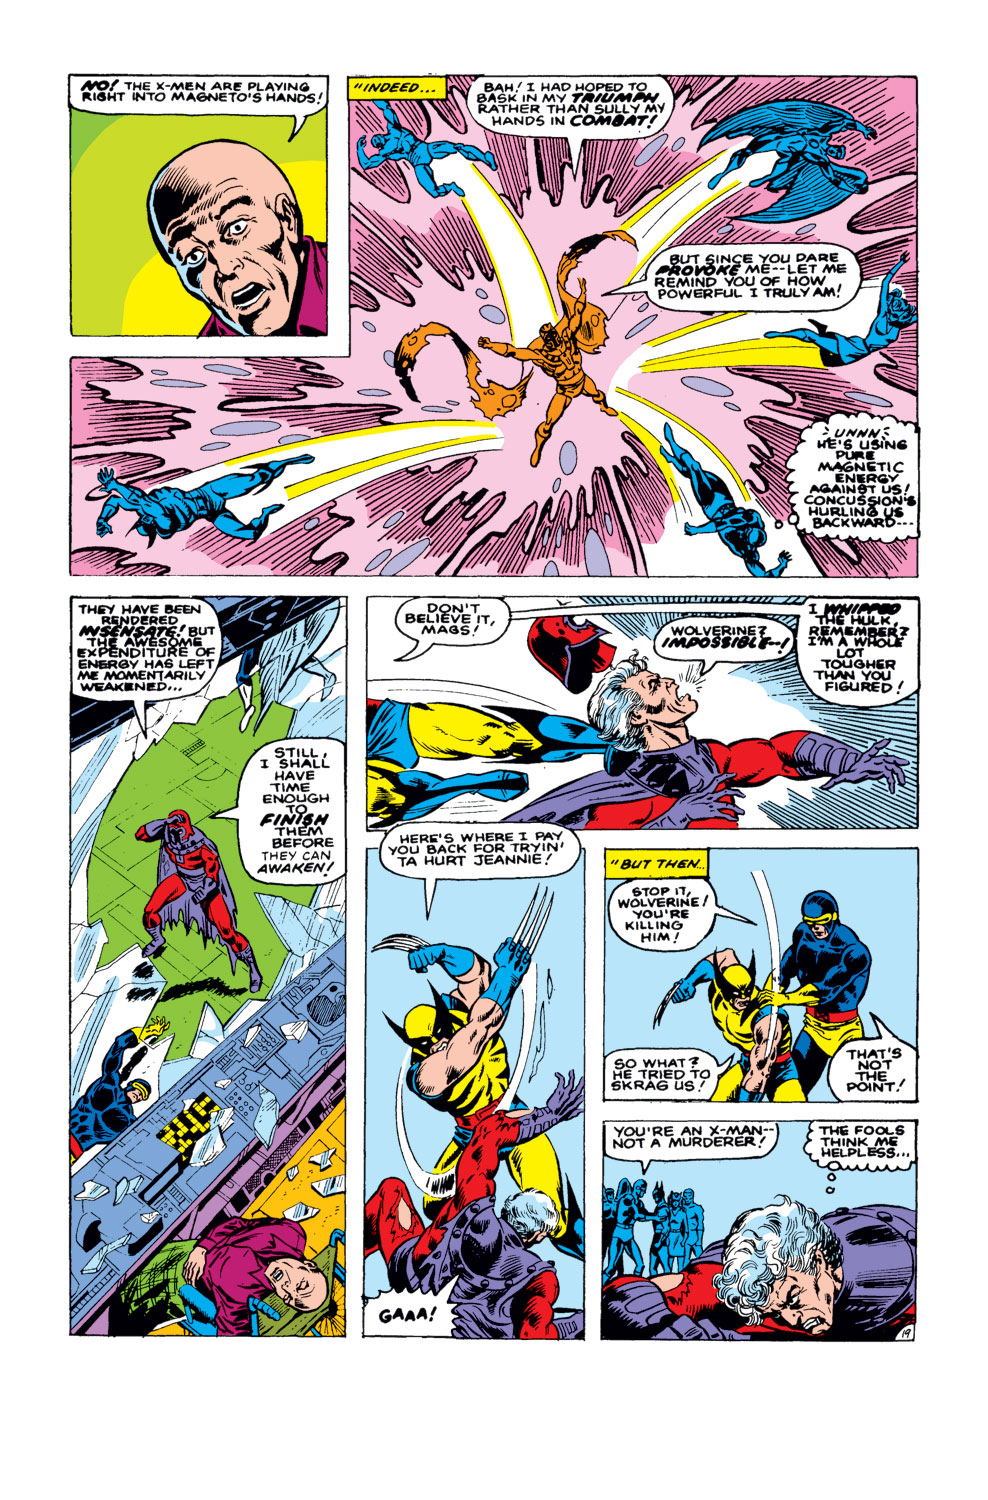 What If? (1977) issue 31 - Wolverine had killed the Hulk - Page 20